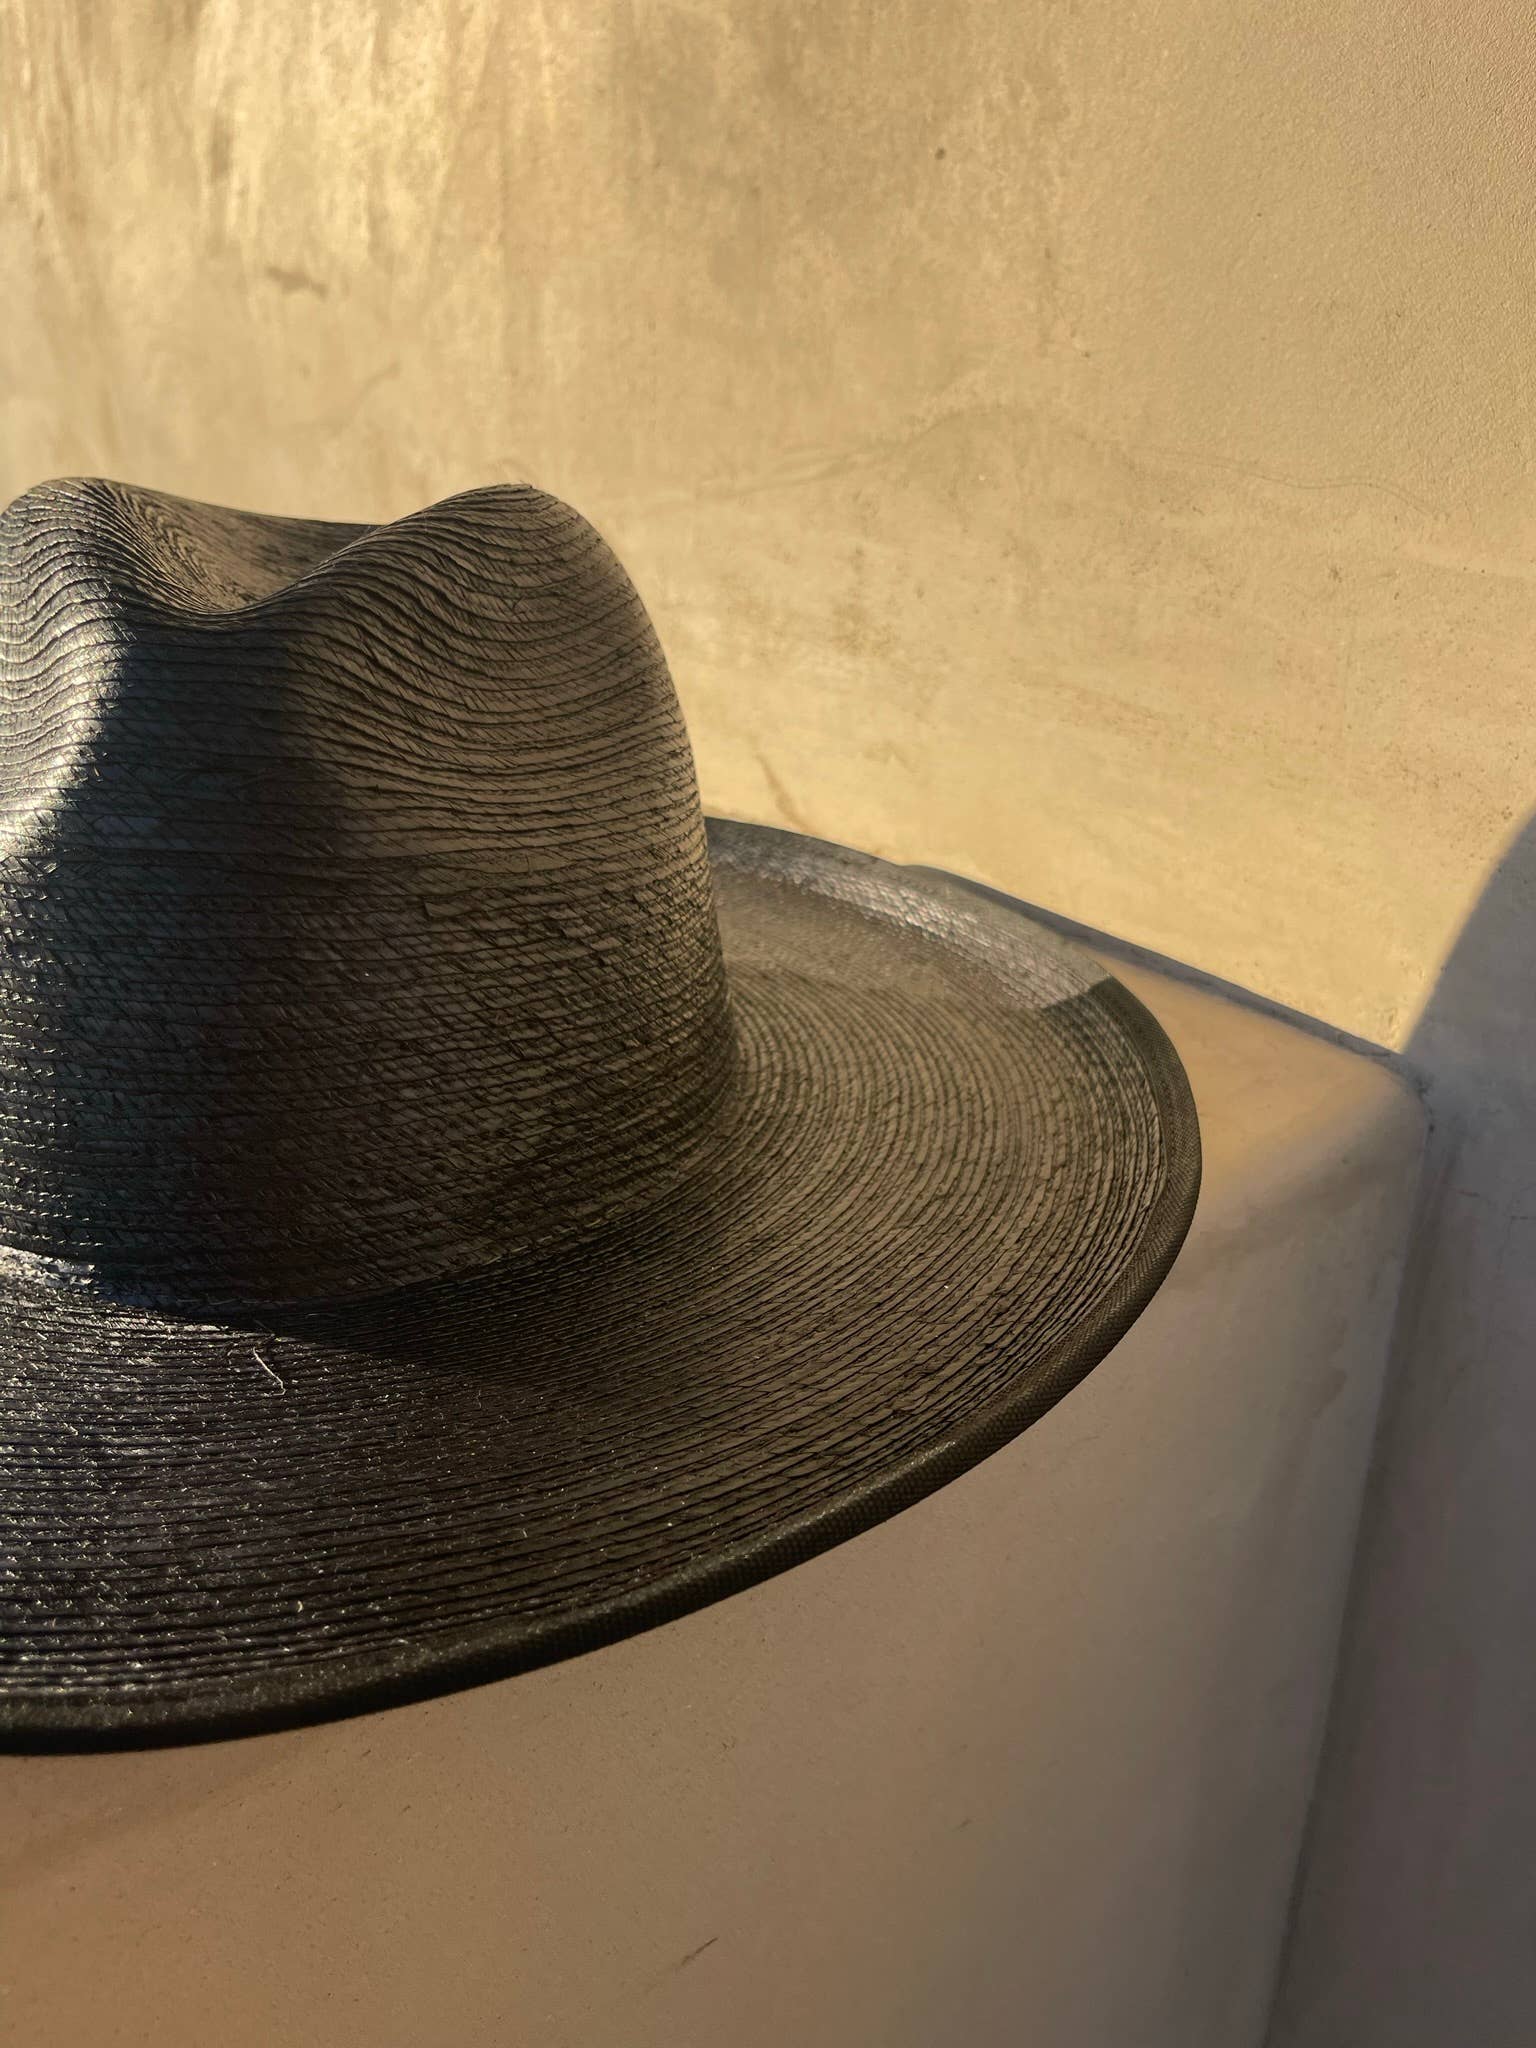 Charcoal Rancher Hat